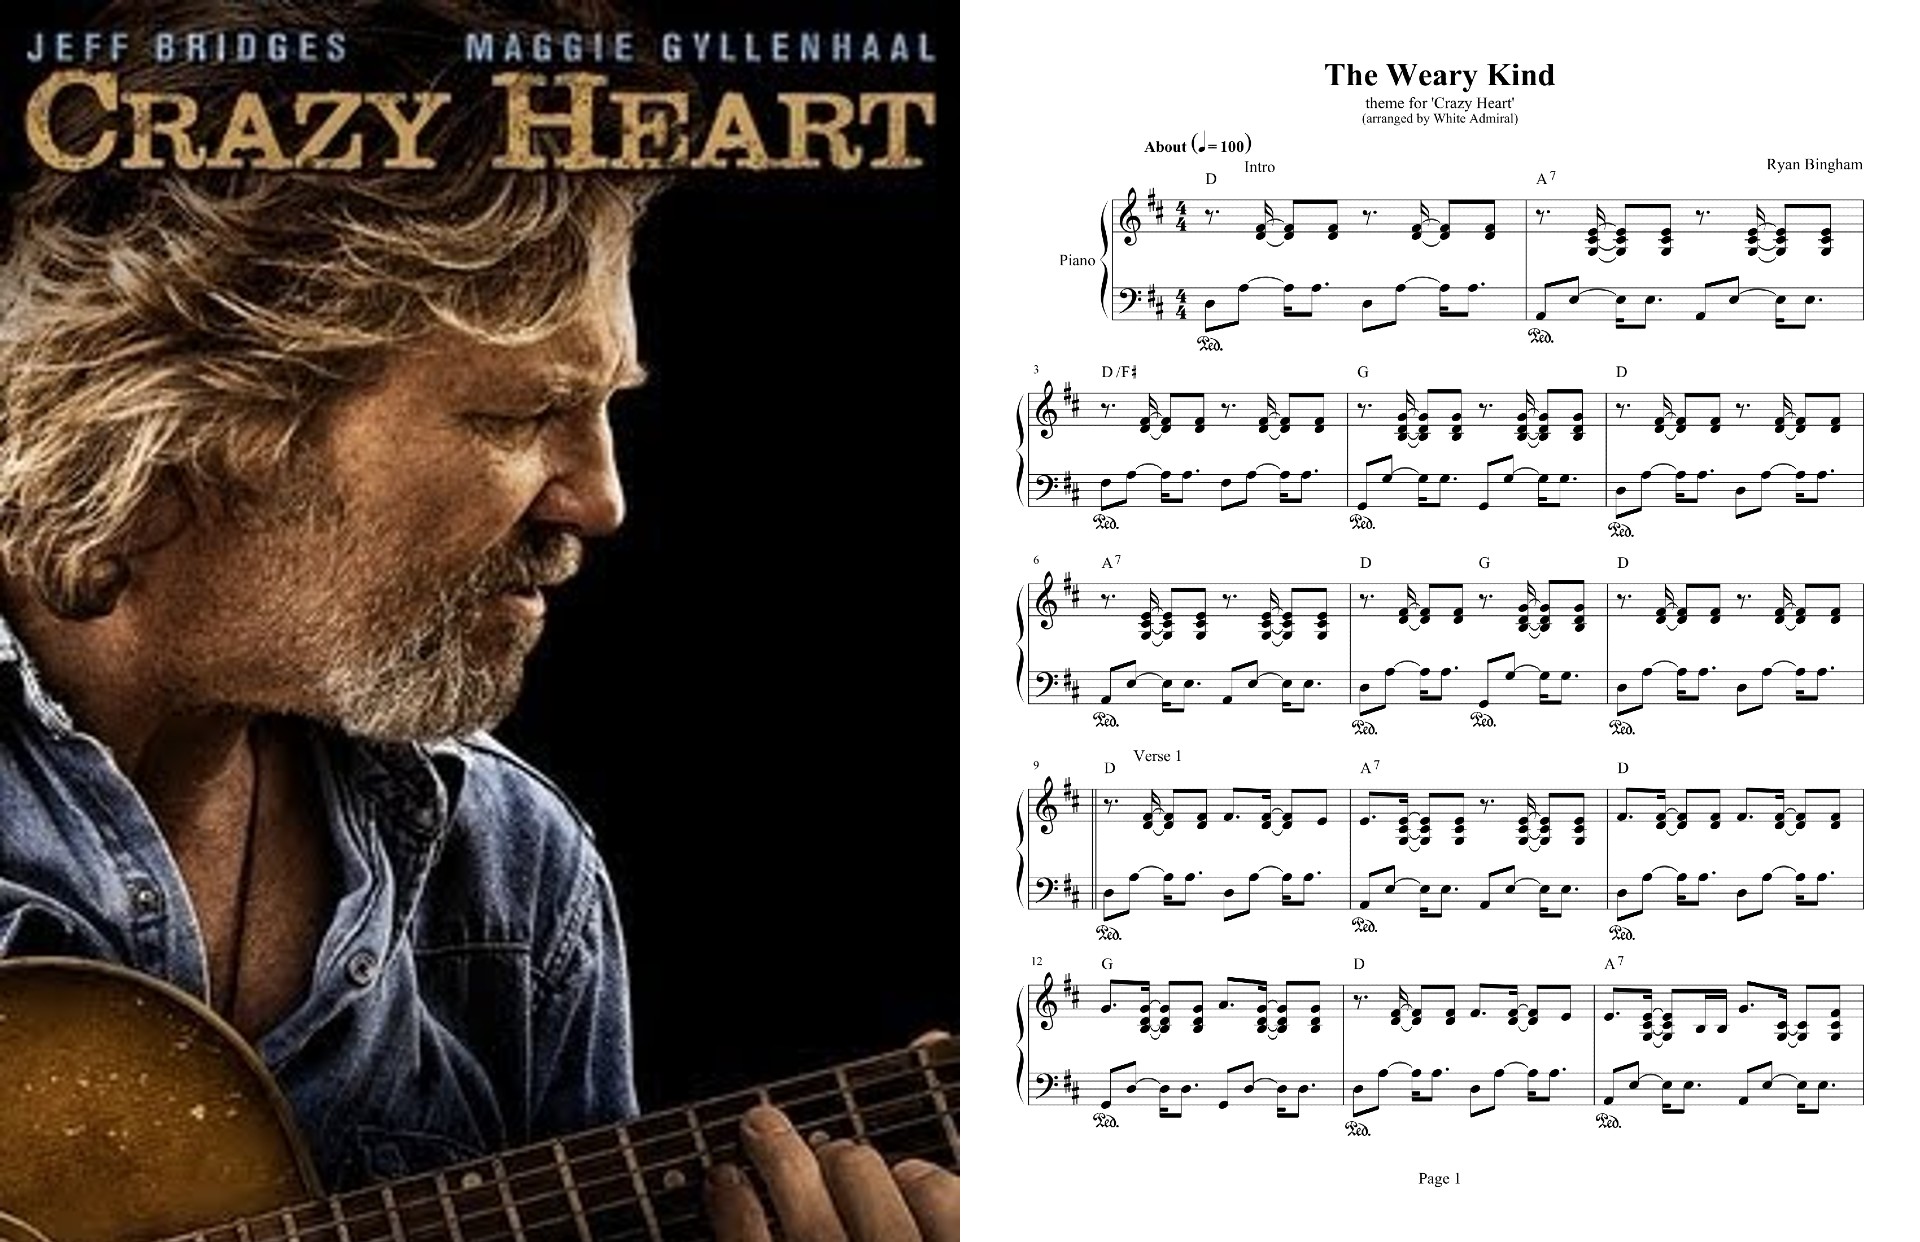 Crazy Heart - The Weary Kind.jpg